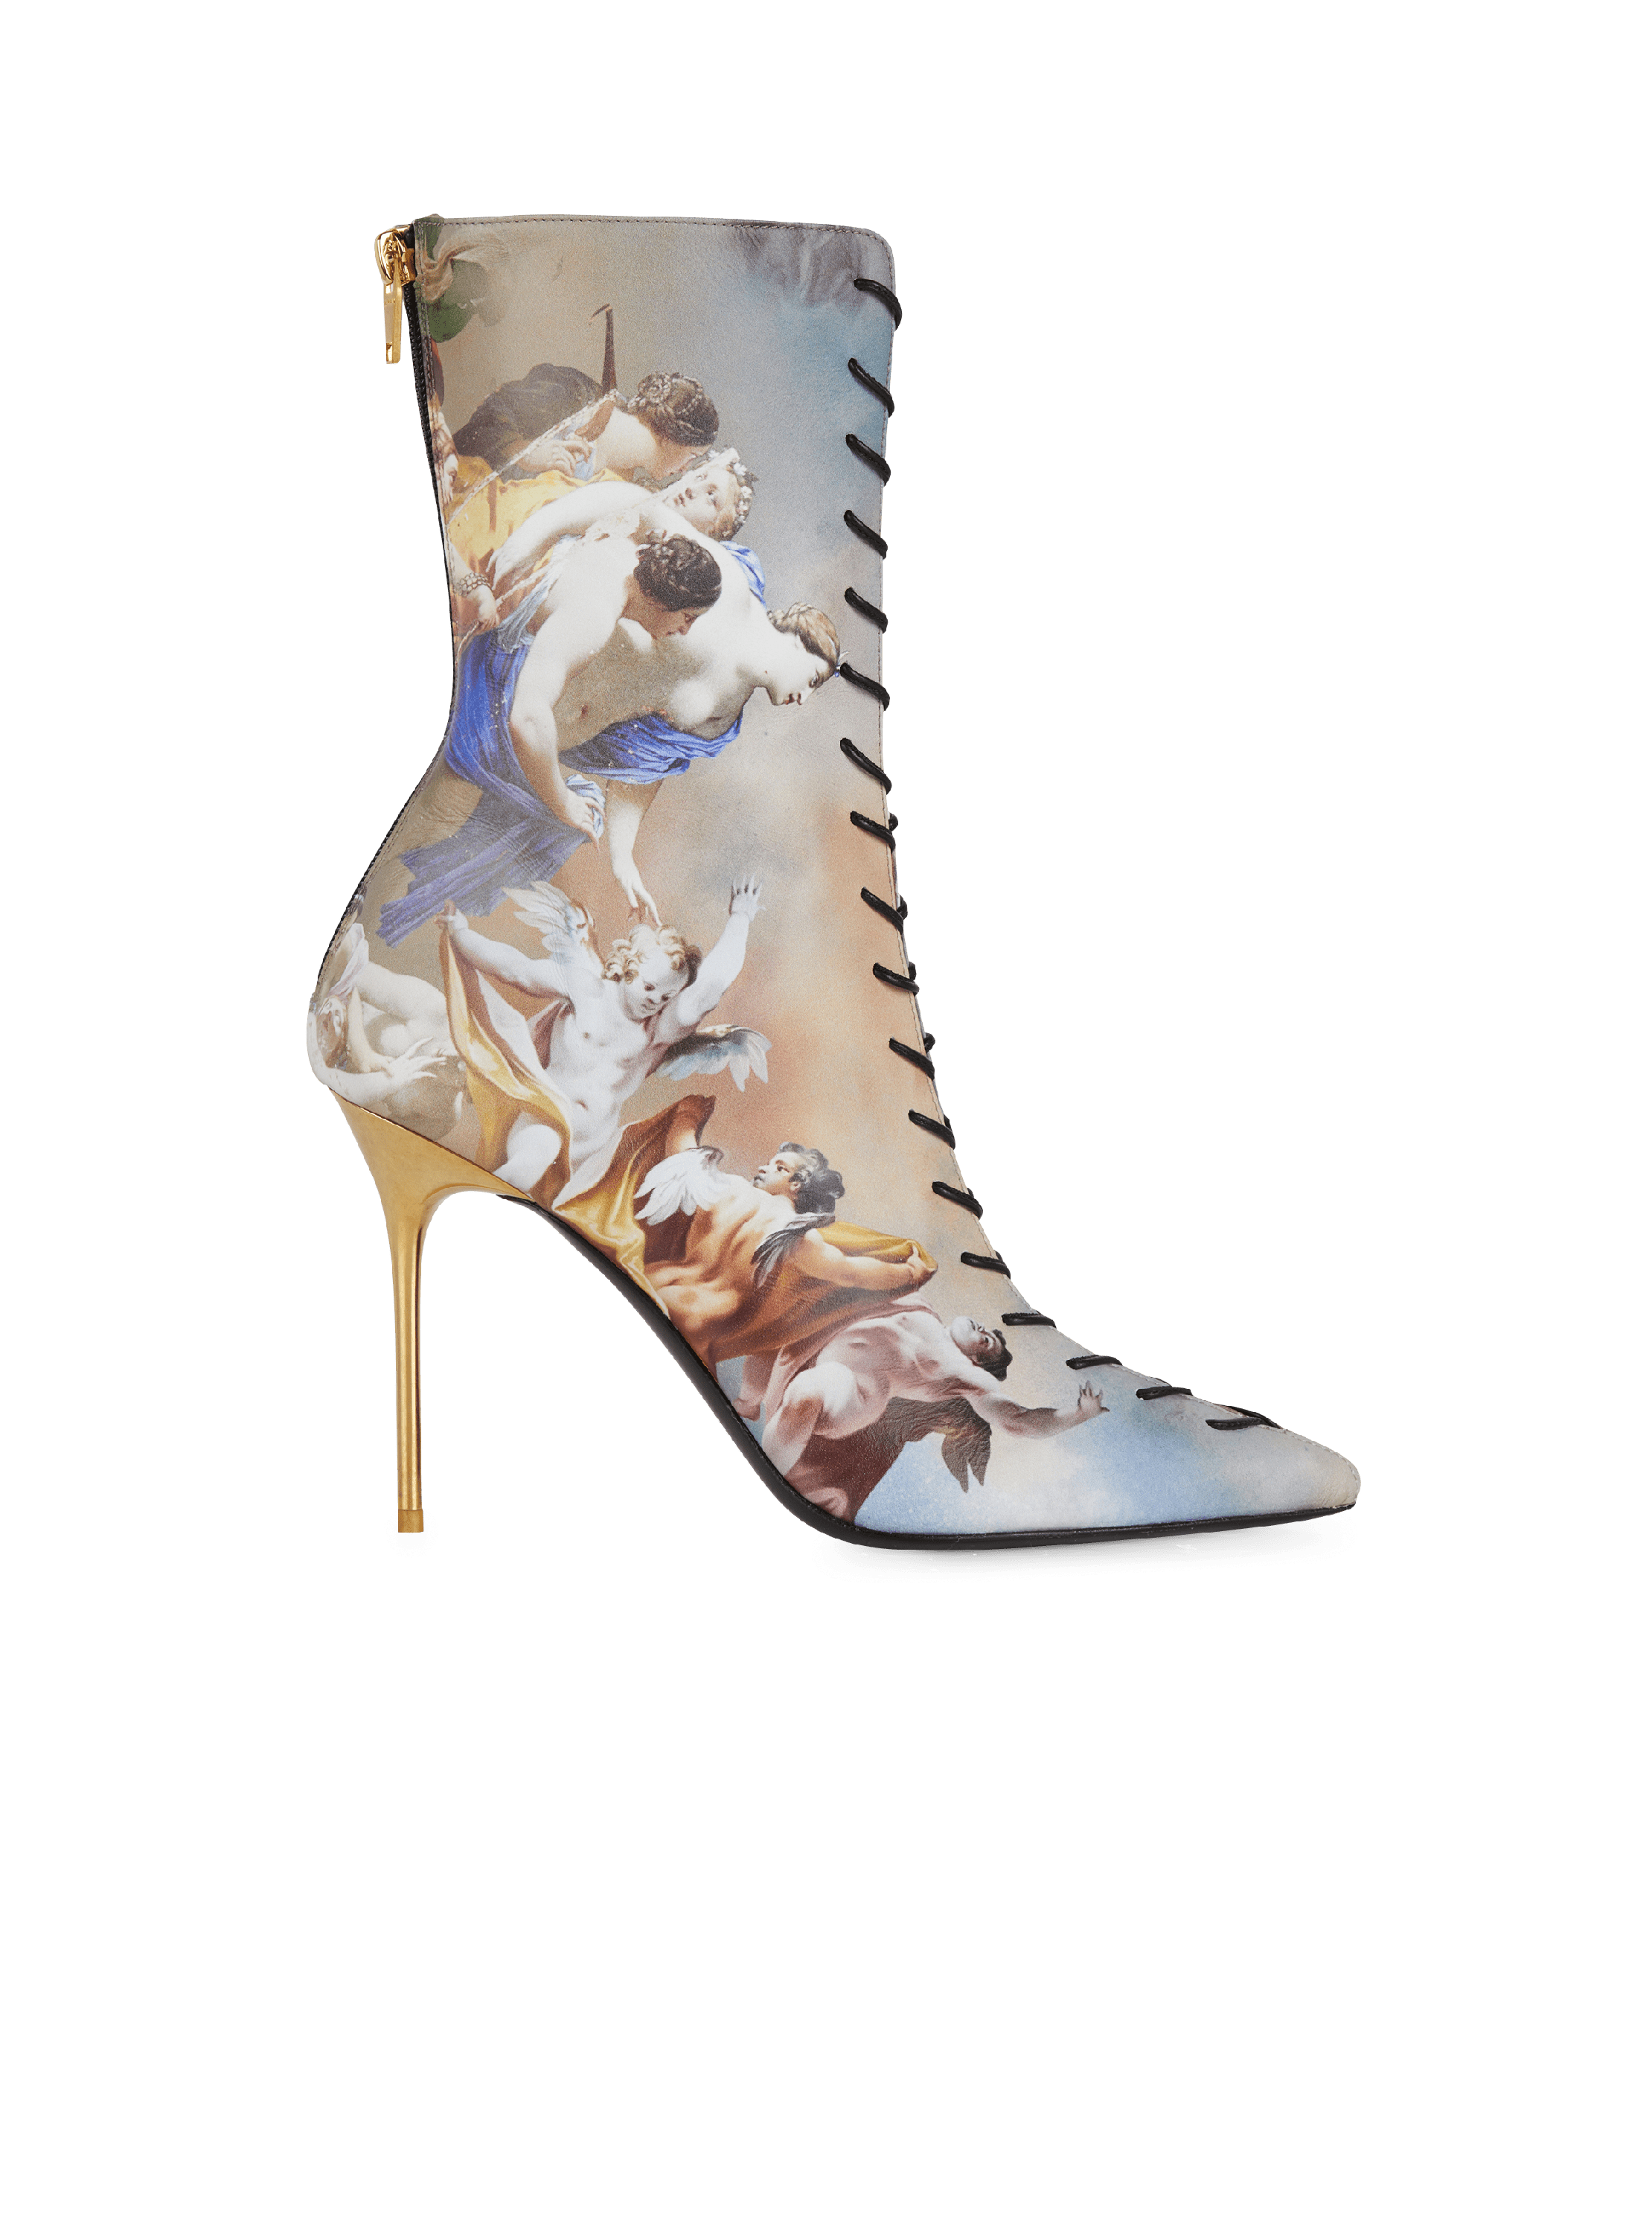 Unique Shades: Getting to Know Balmain's Caquie Boots